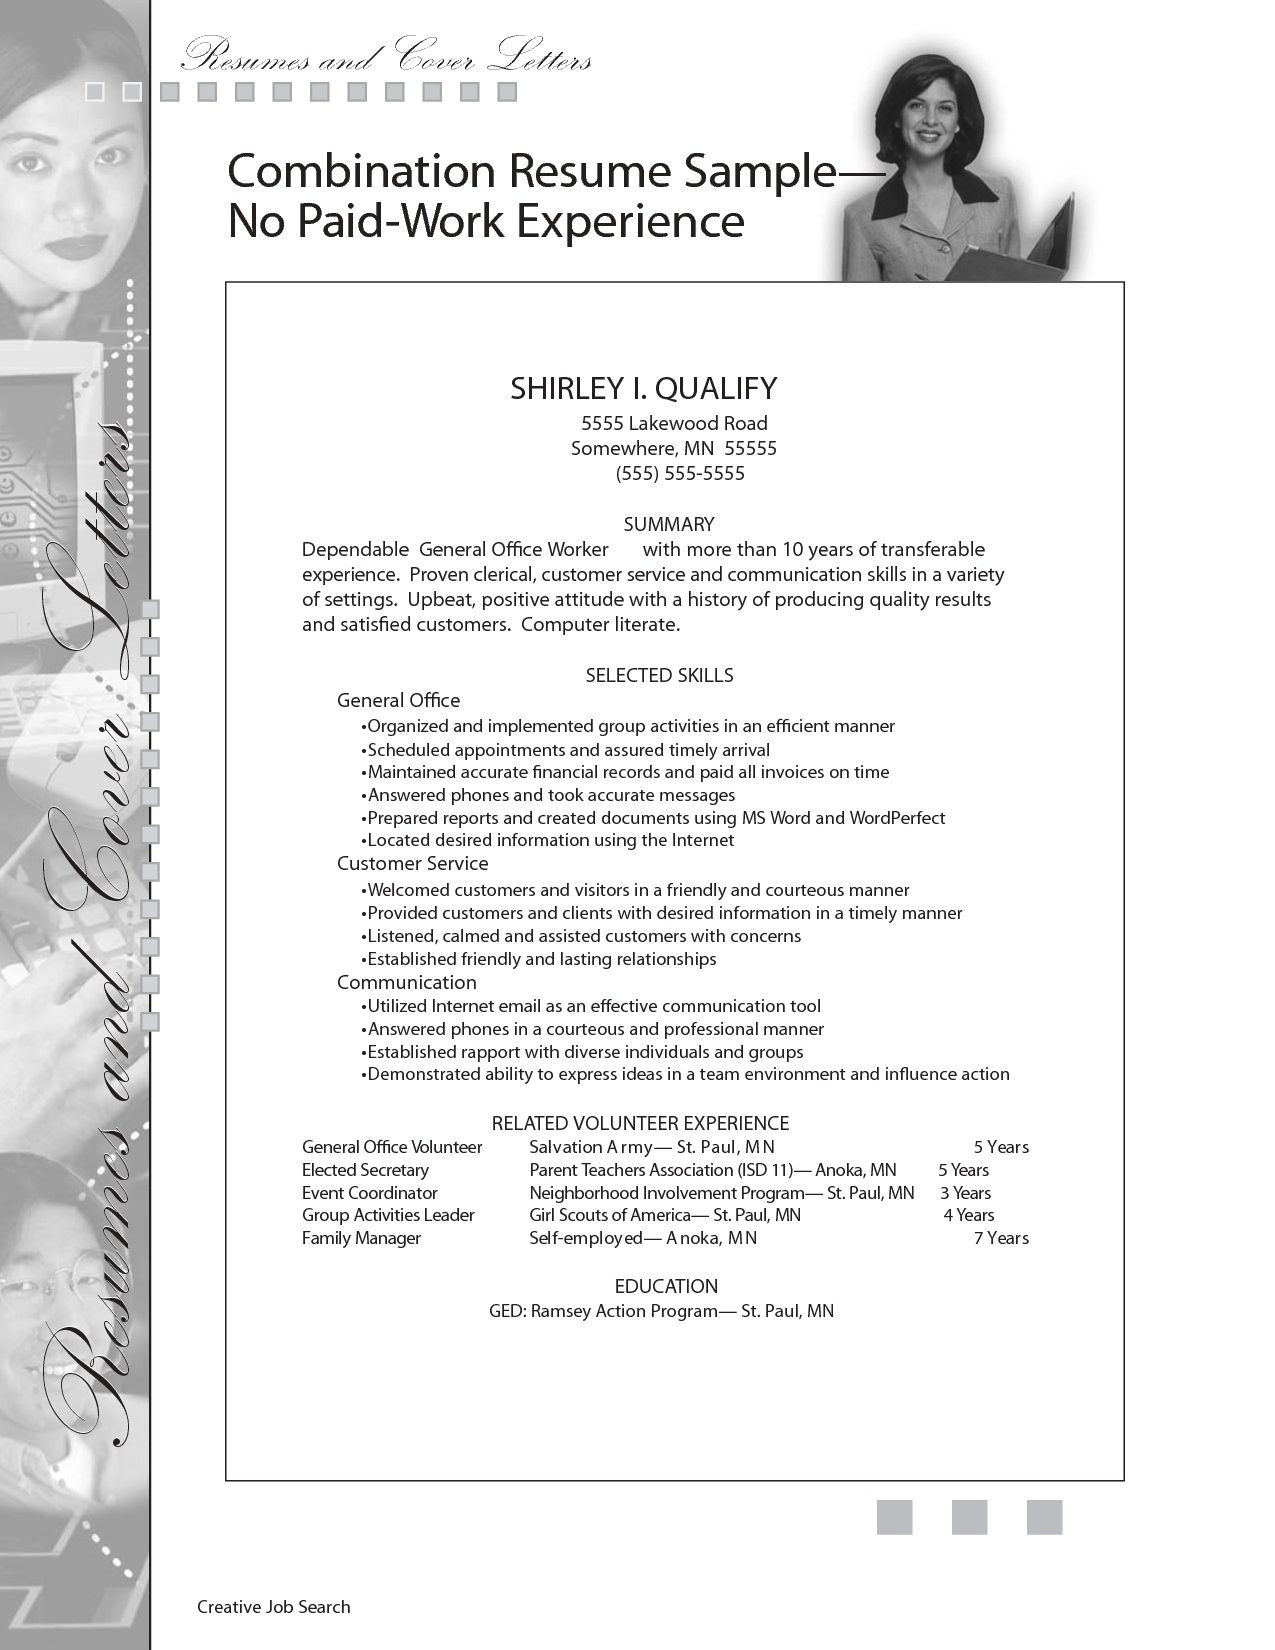 Sample Resume for Ged Recipients with No Experience Job Resume with No Work Experience